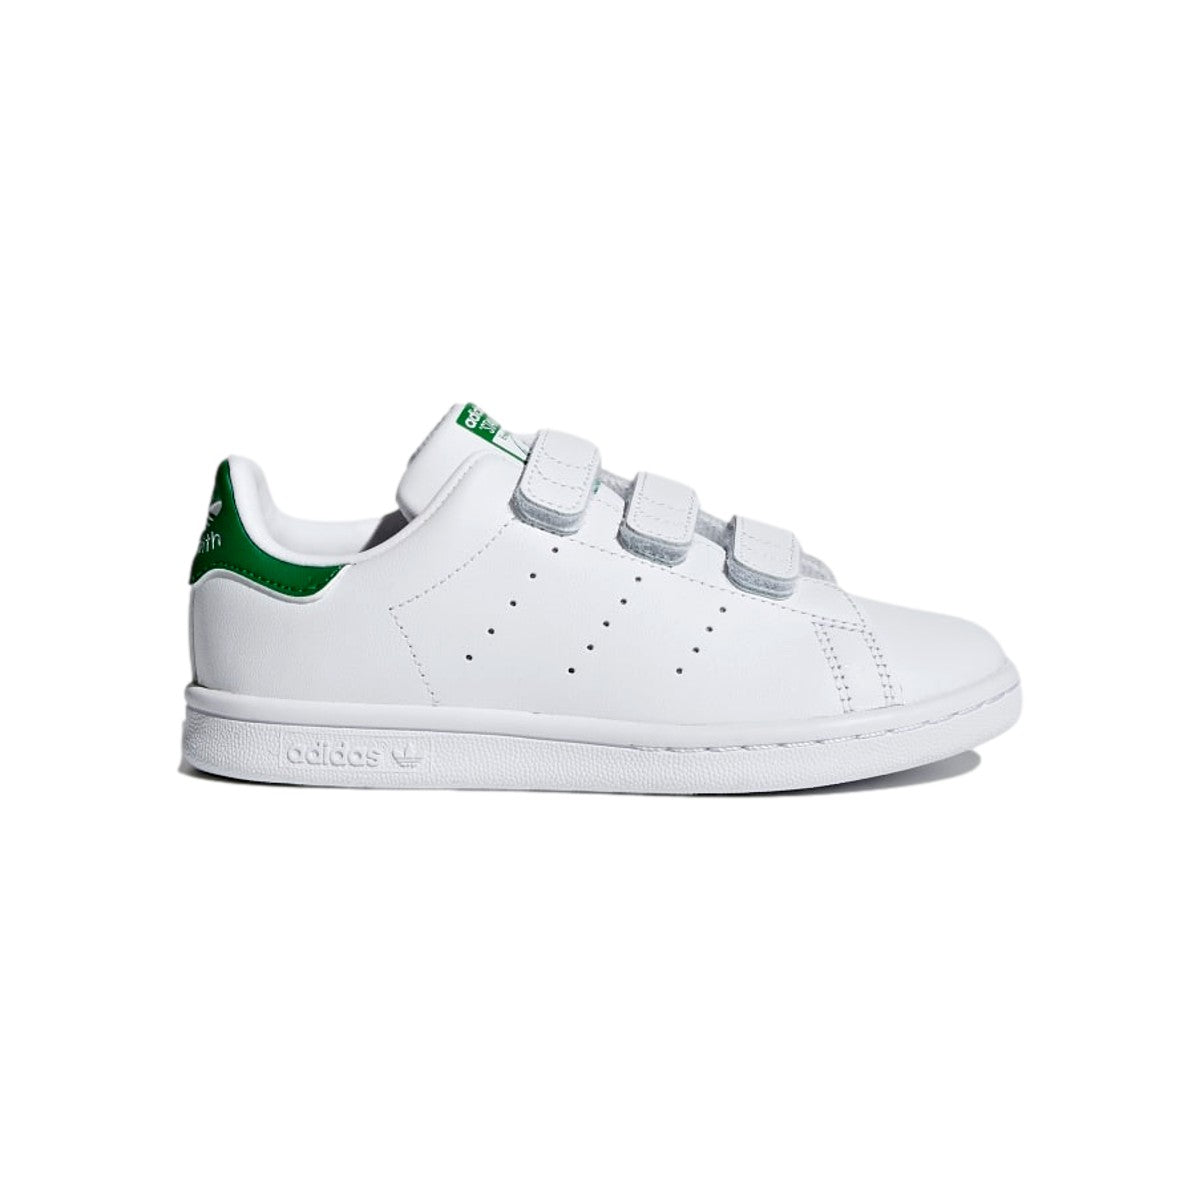 Adidas Stan Smith Outlet Online Save 64% | maikyaulaw.com